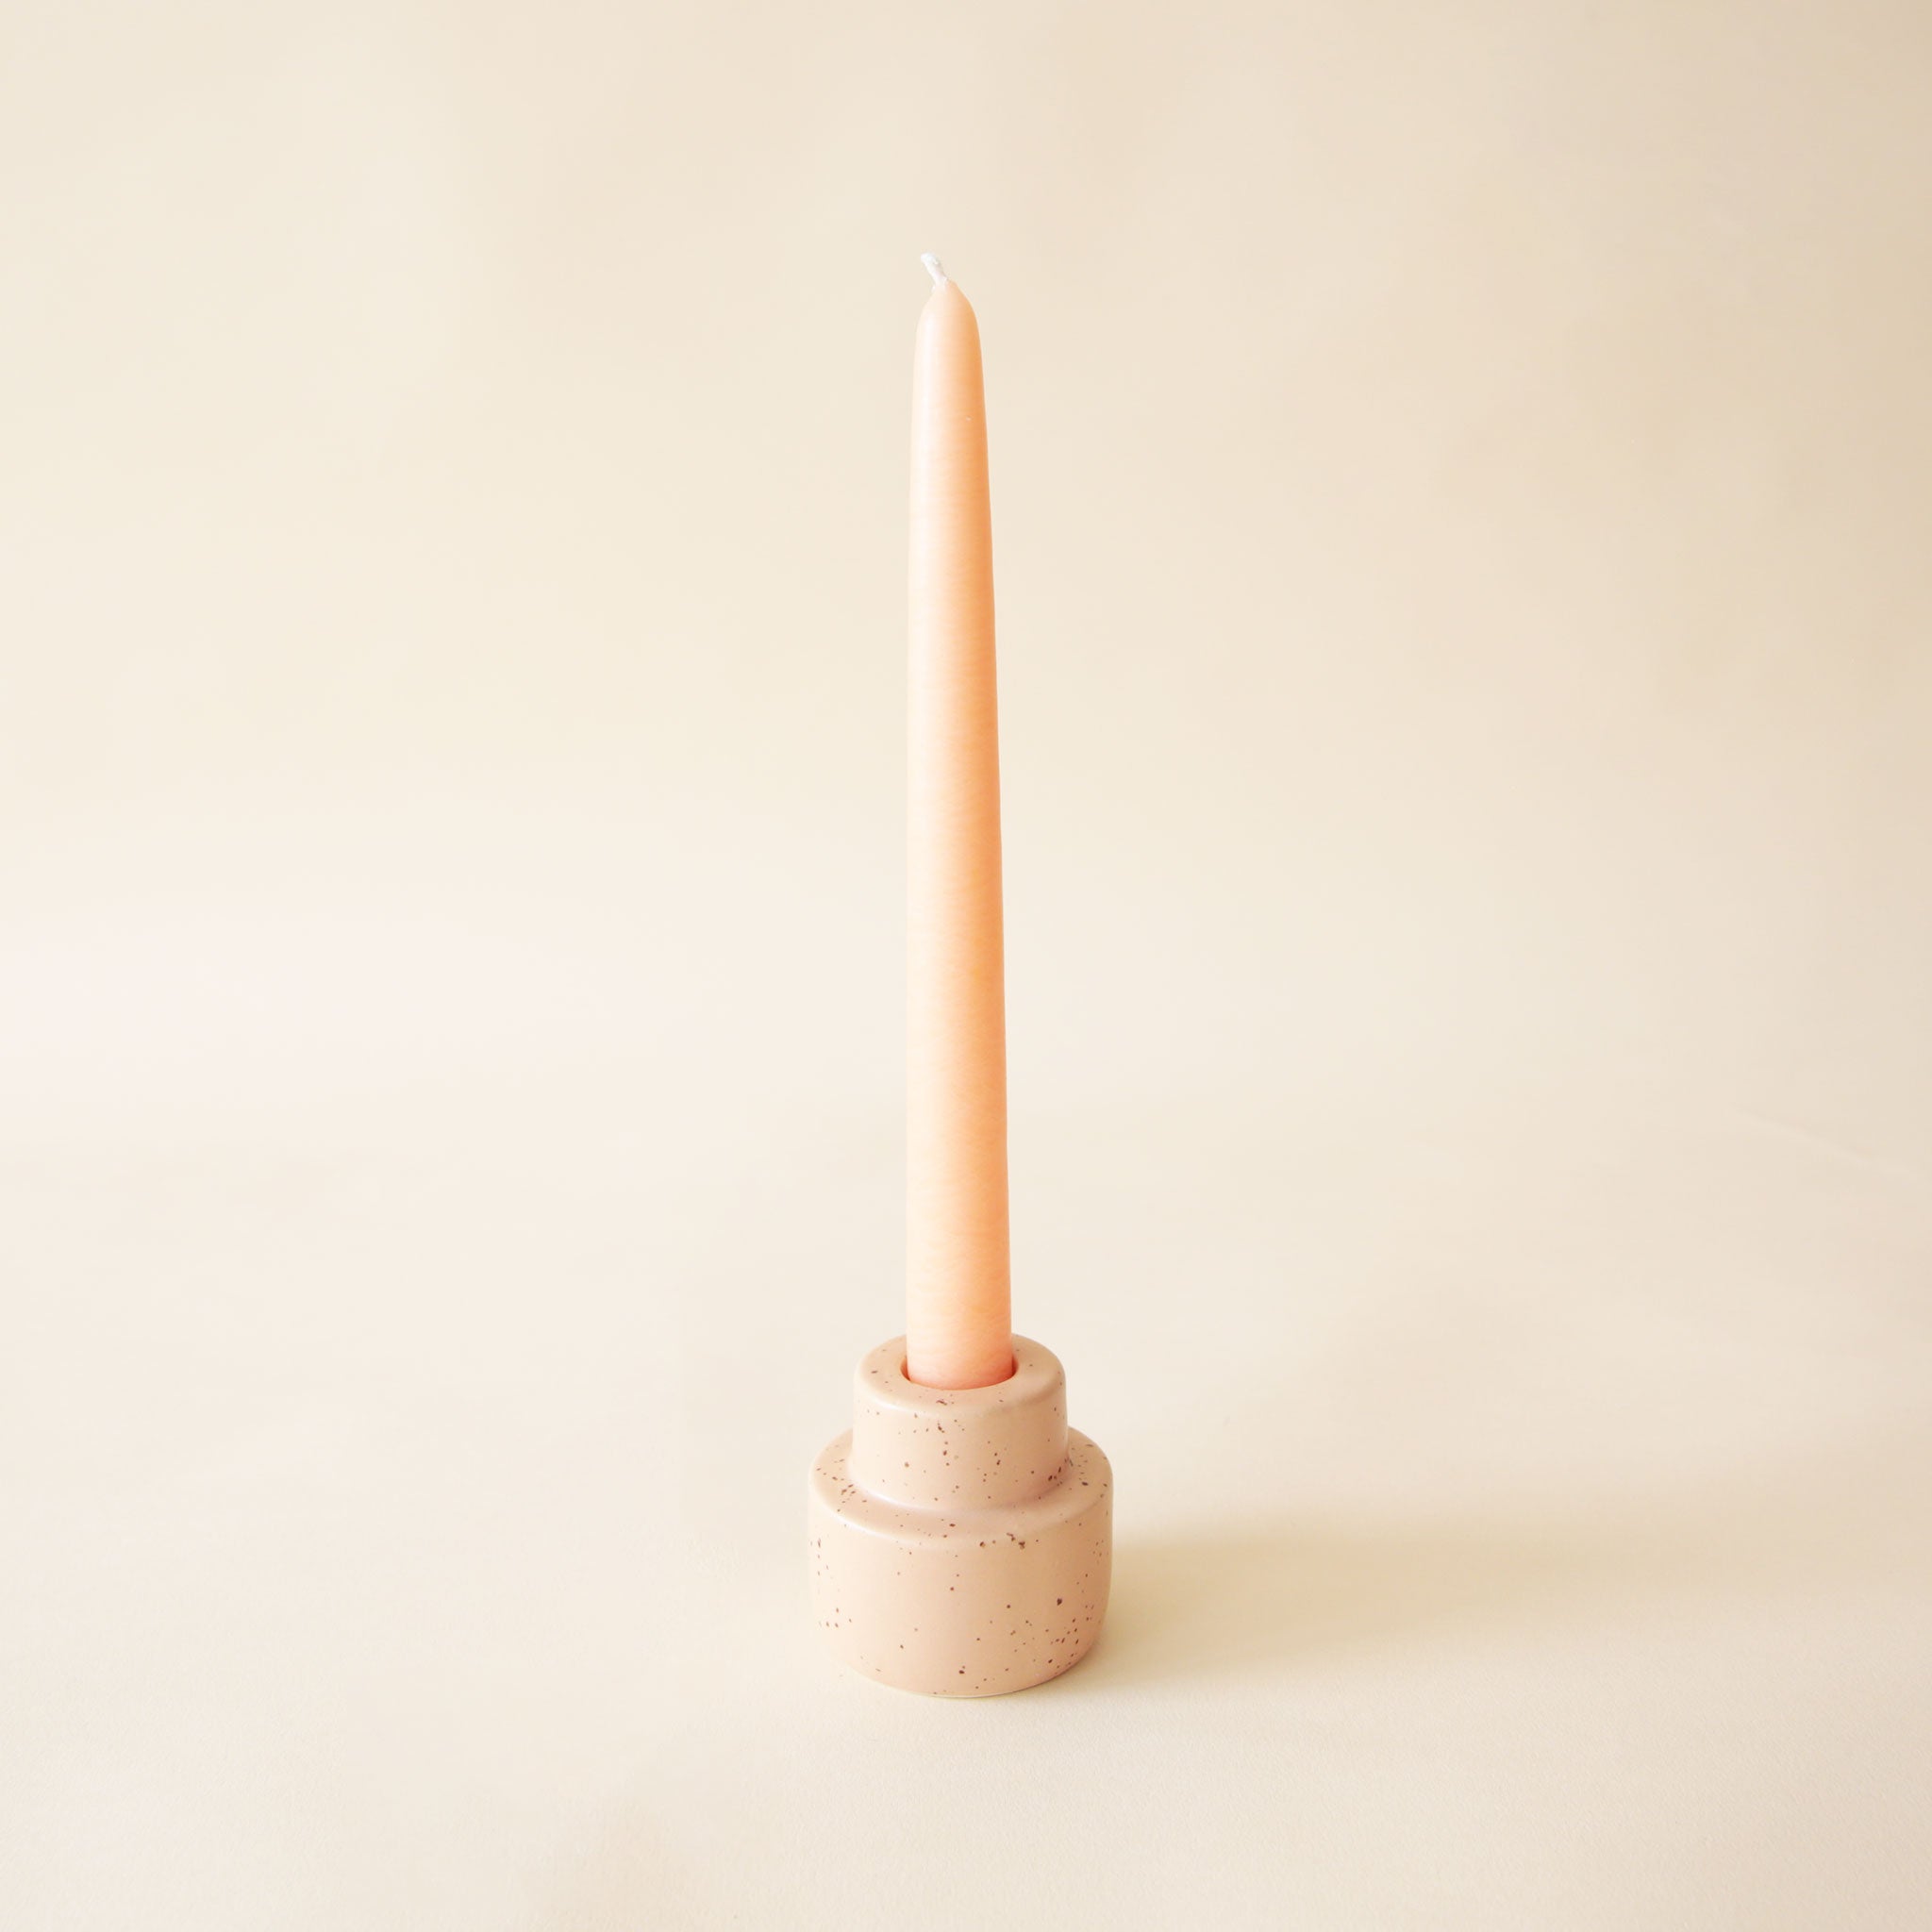 The peach colored ceramic candleholder with a taper candle in the center. 